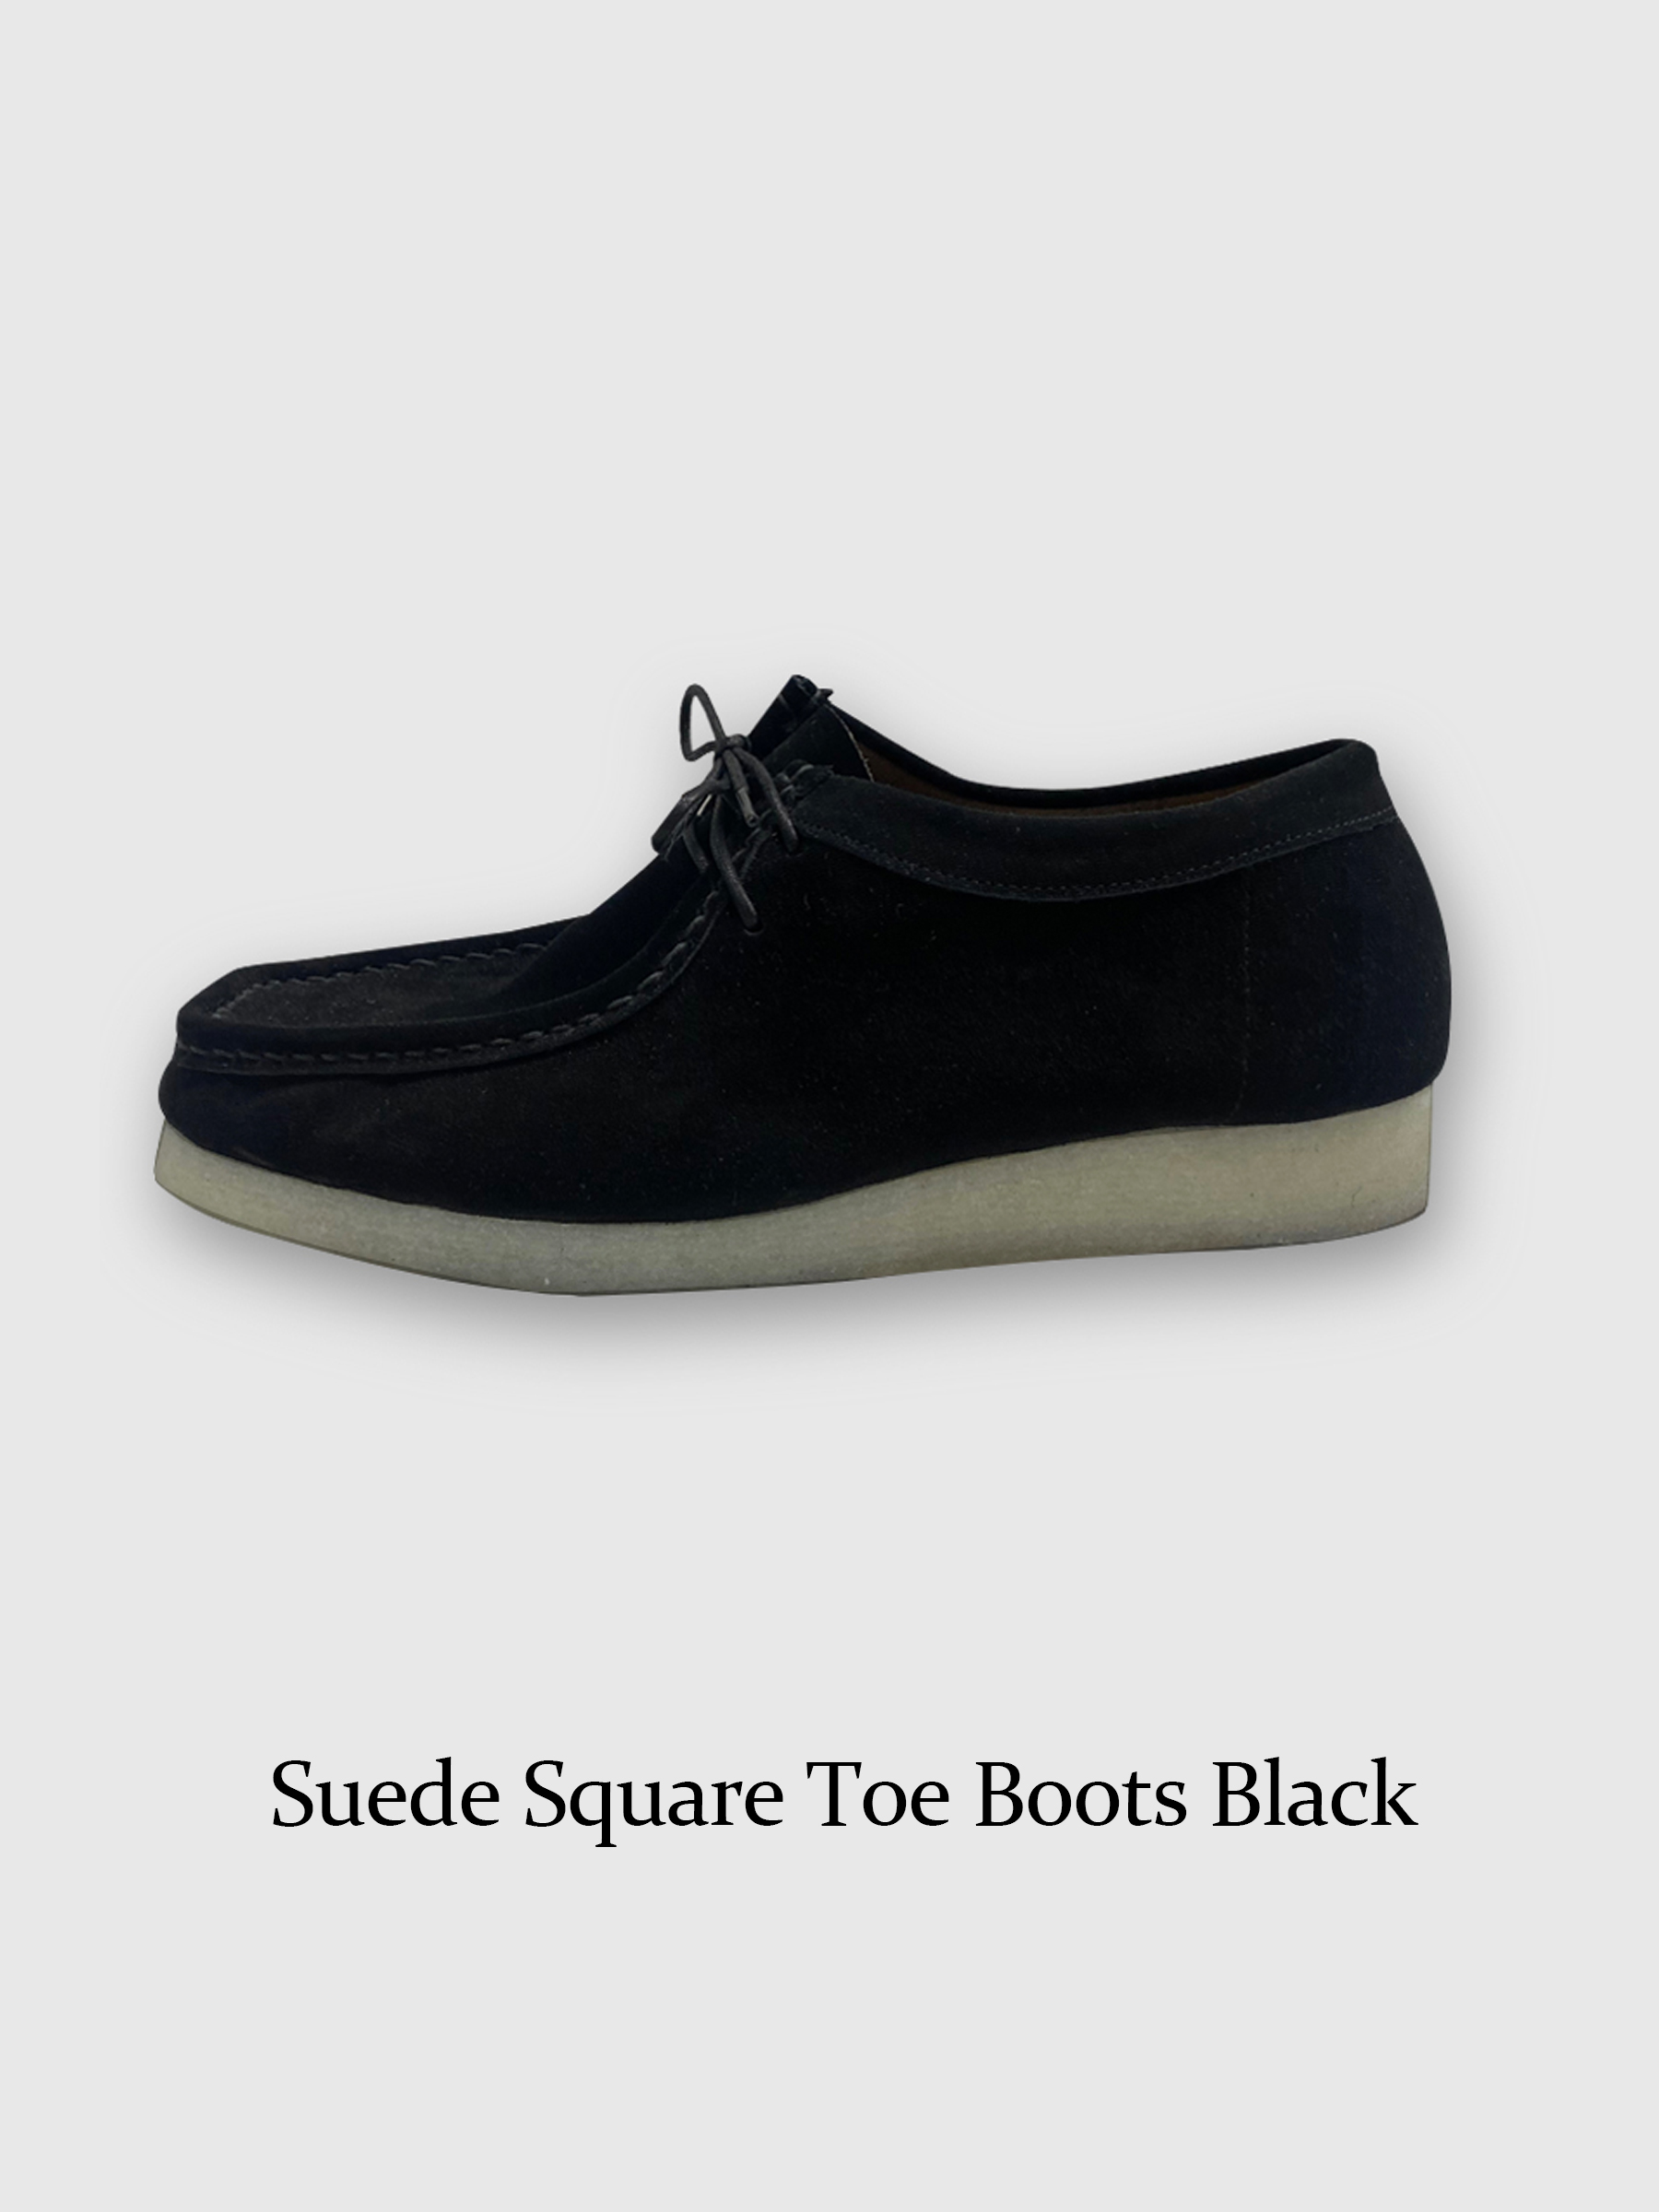 Suede Square Toe Boots Black